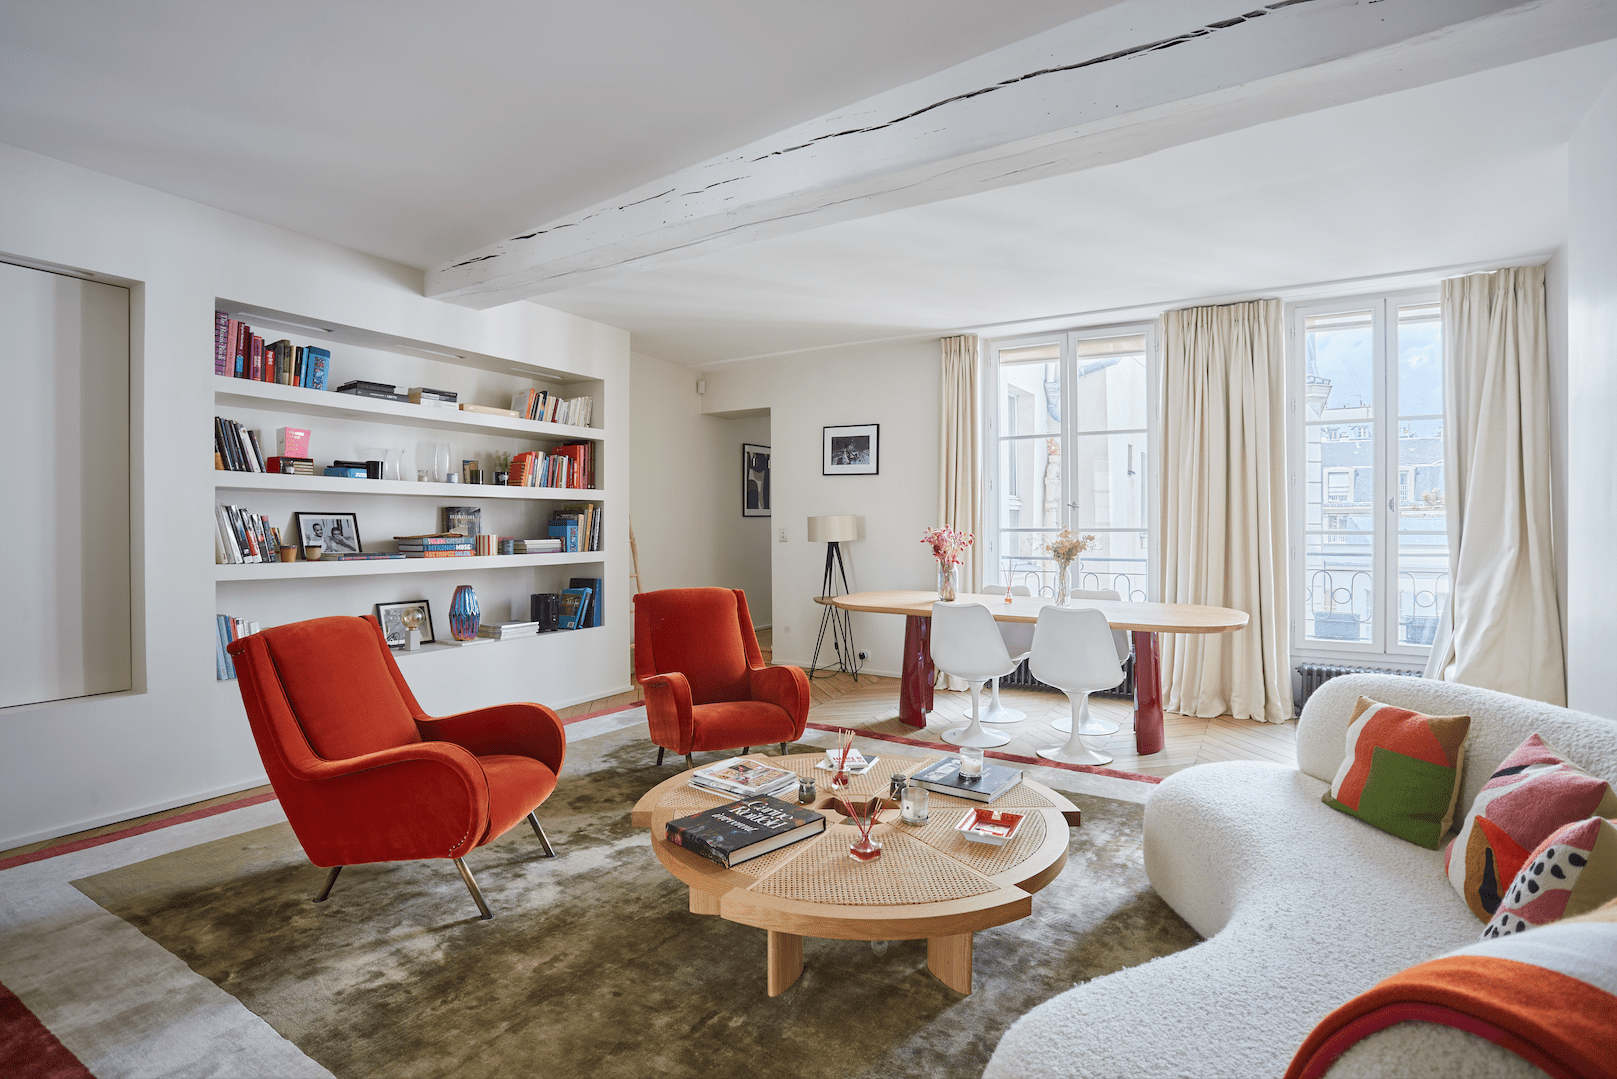 MR Agency Real Estate, Apartment Paris 6 to sell